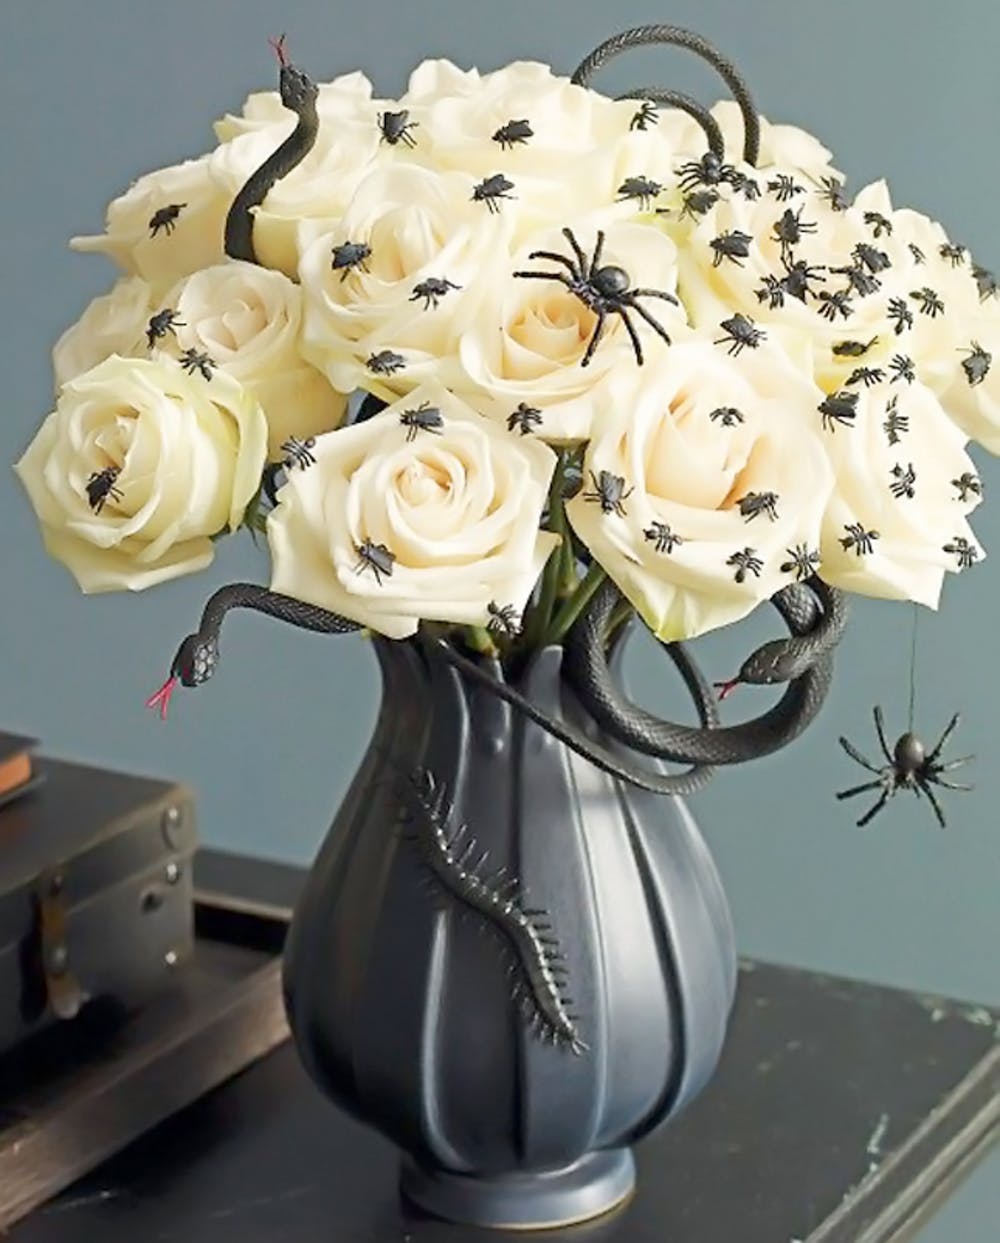 How to use flowers for your Halloween decor